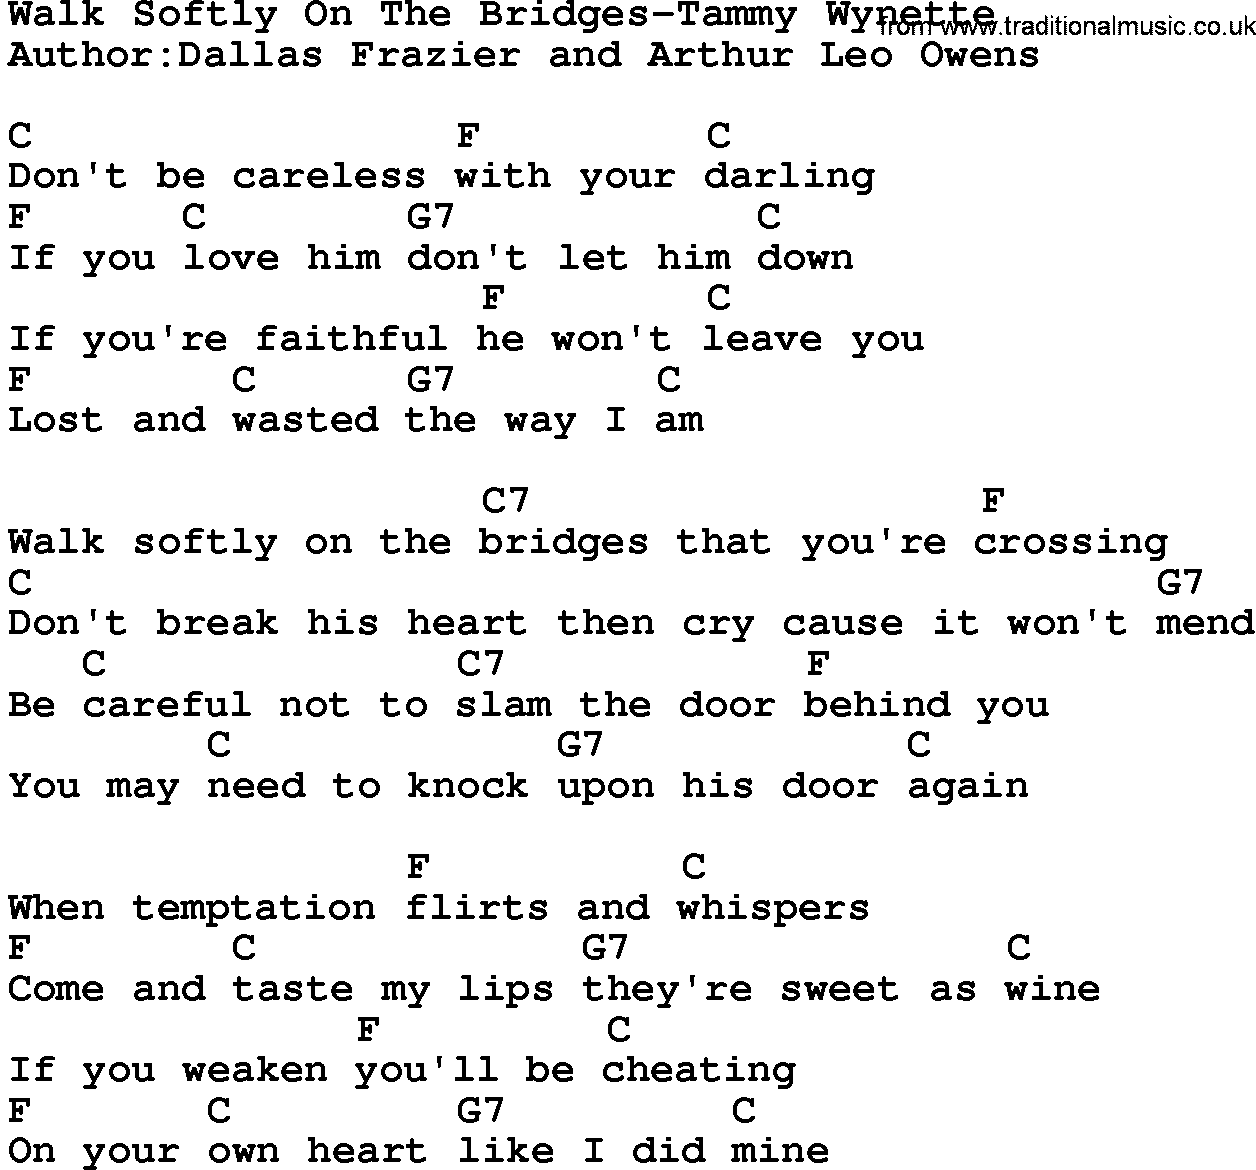 Country music song: Walk Softly On The Bridges-Tammy Wynette lyrics and chords